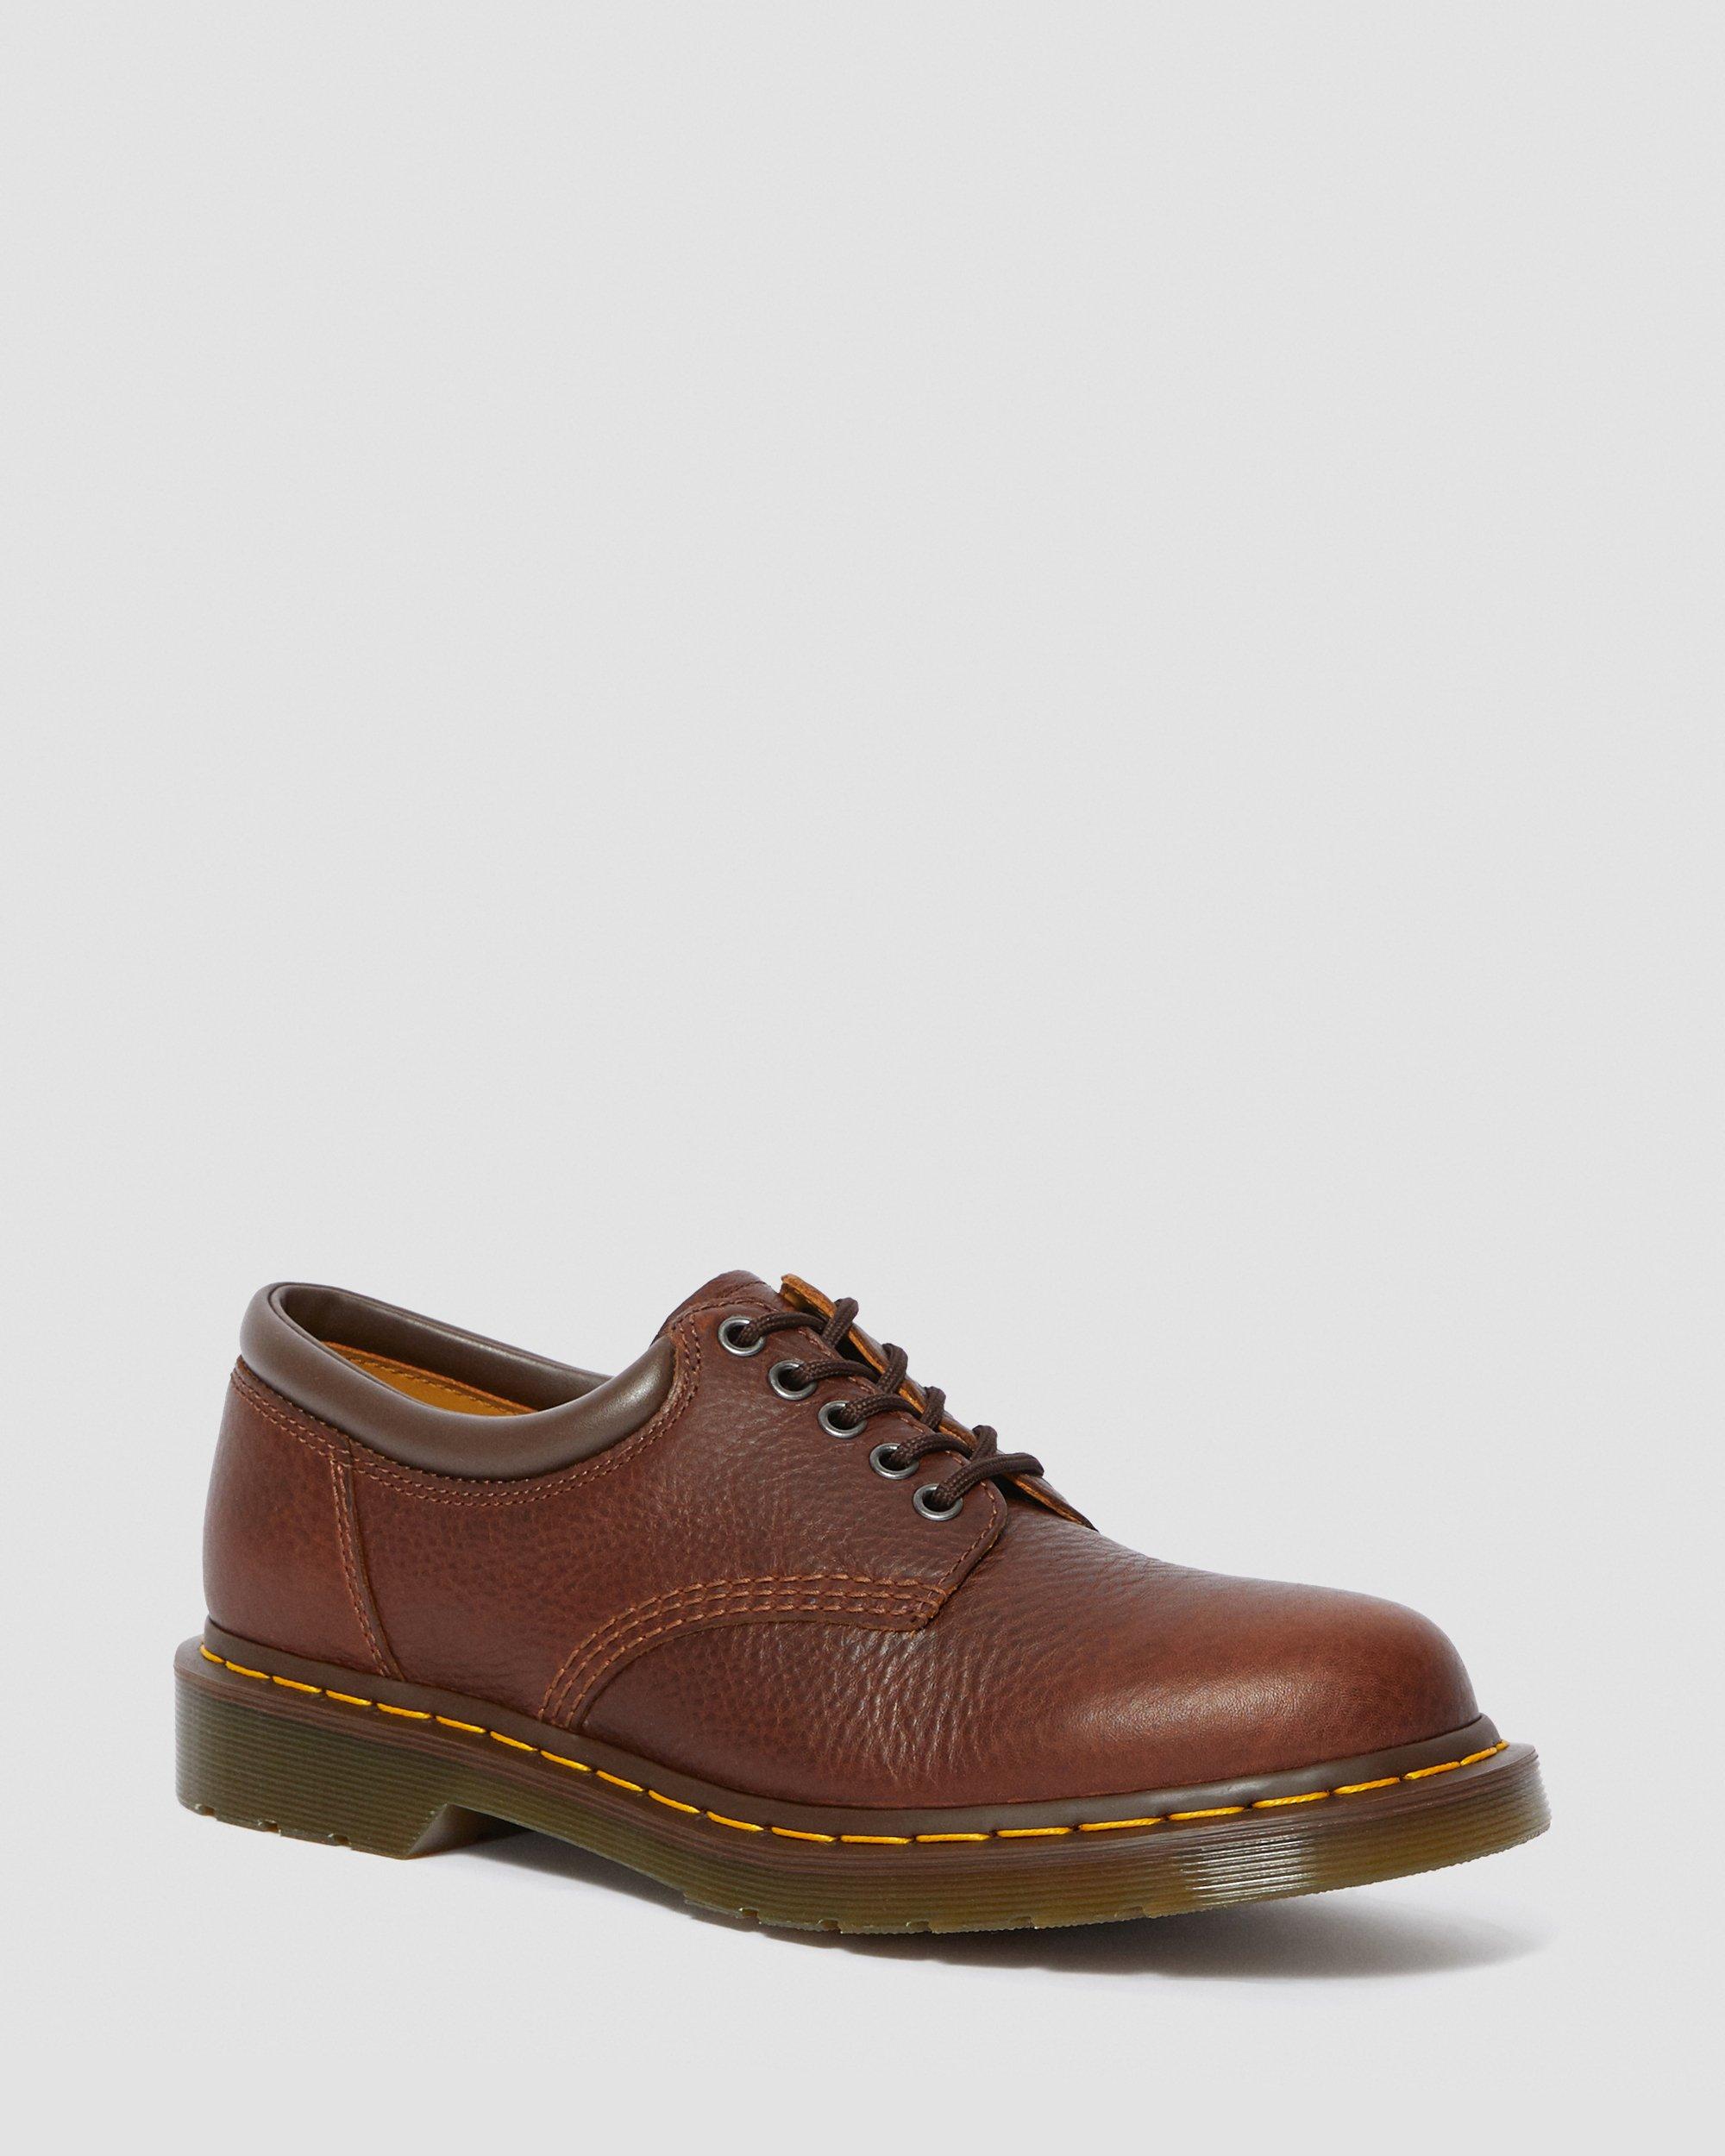 8053 Harvest Leather Casual Shoes in Tan